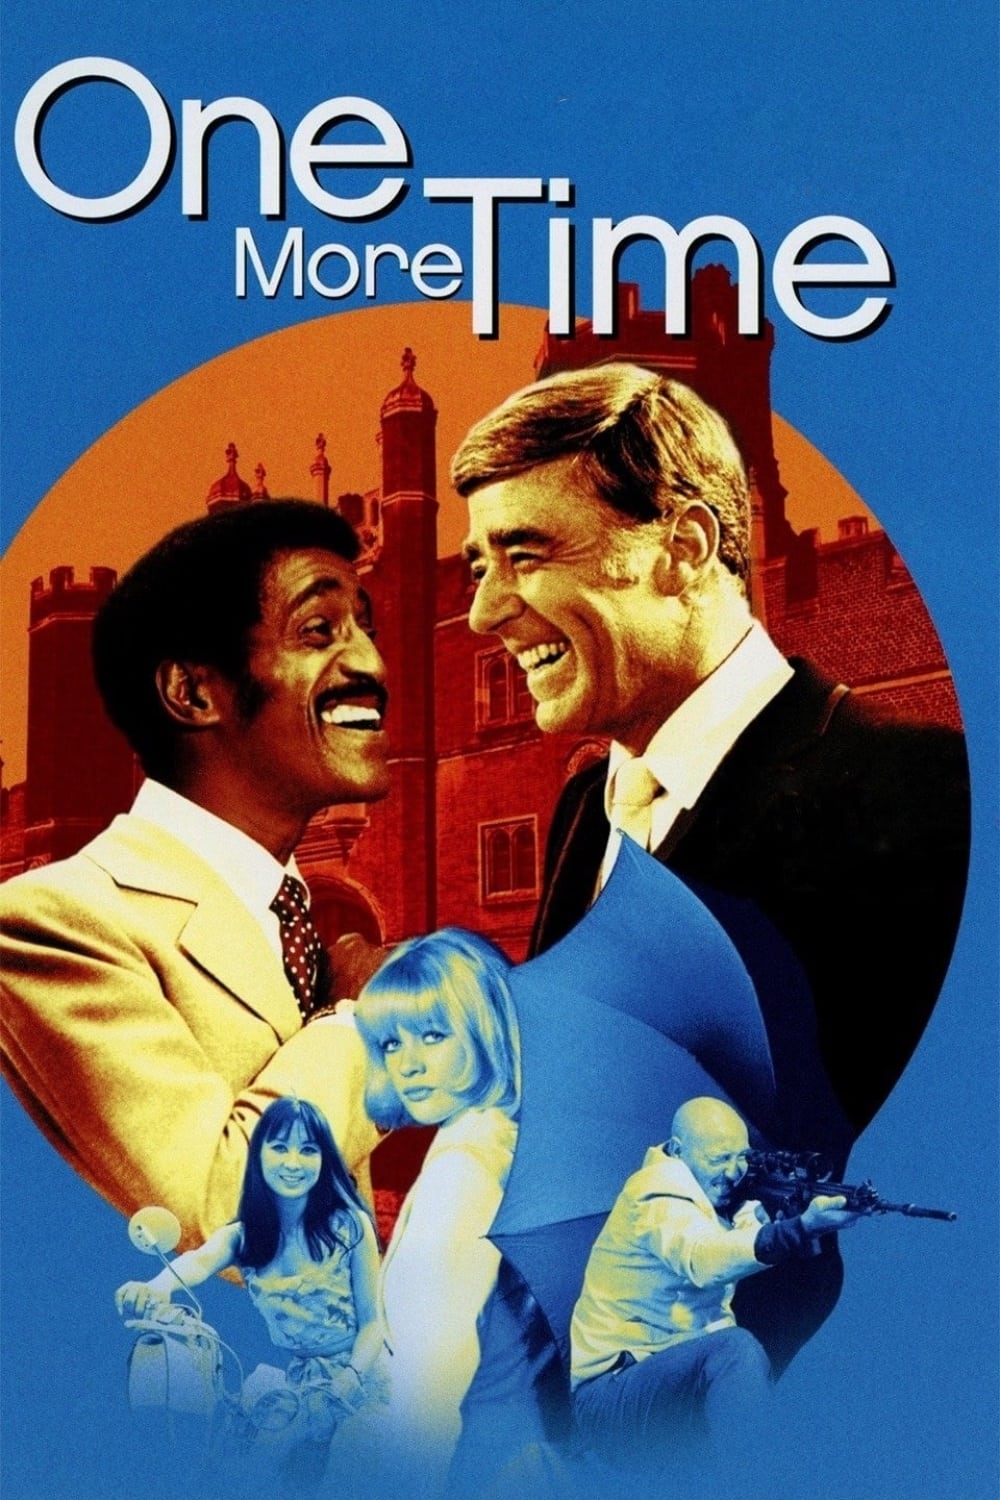 One More Time (1970)